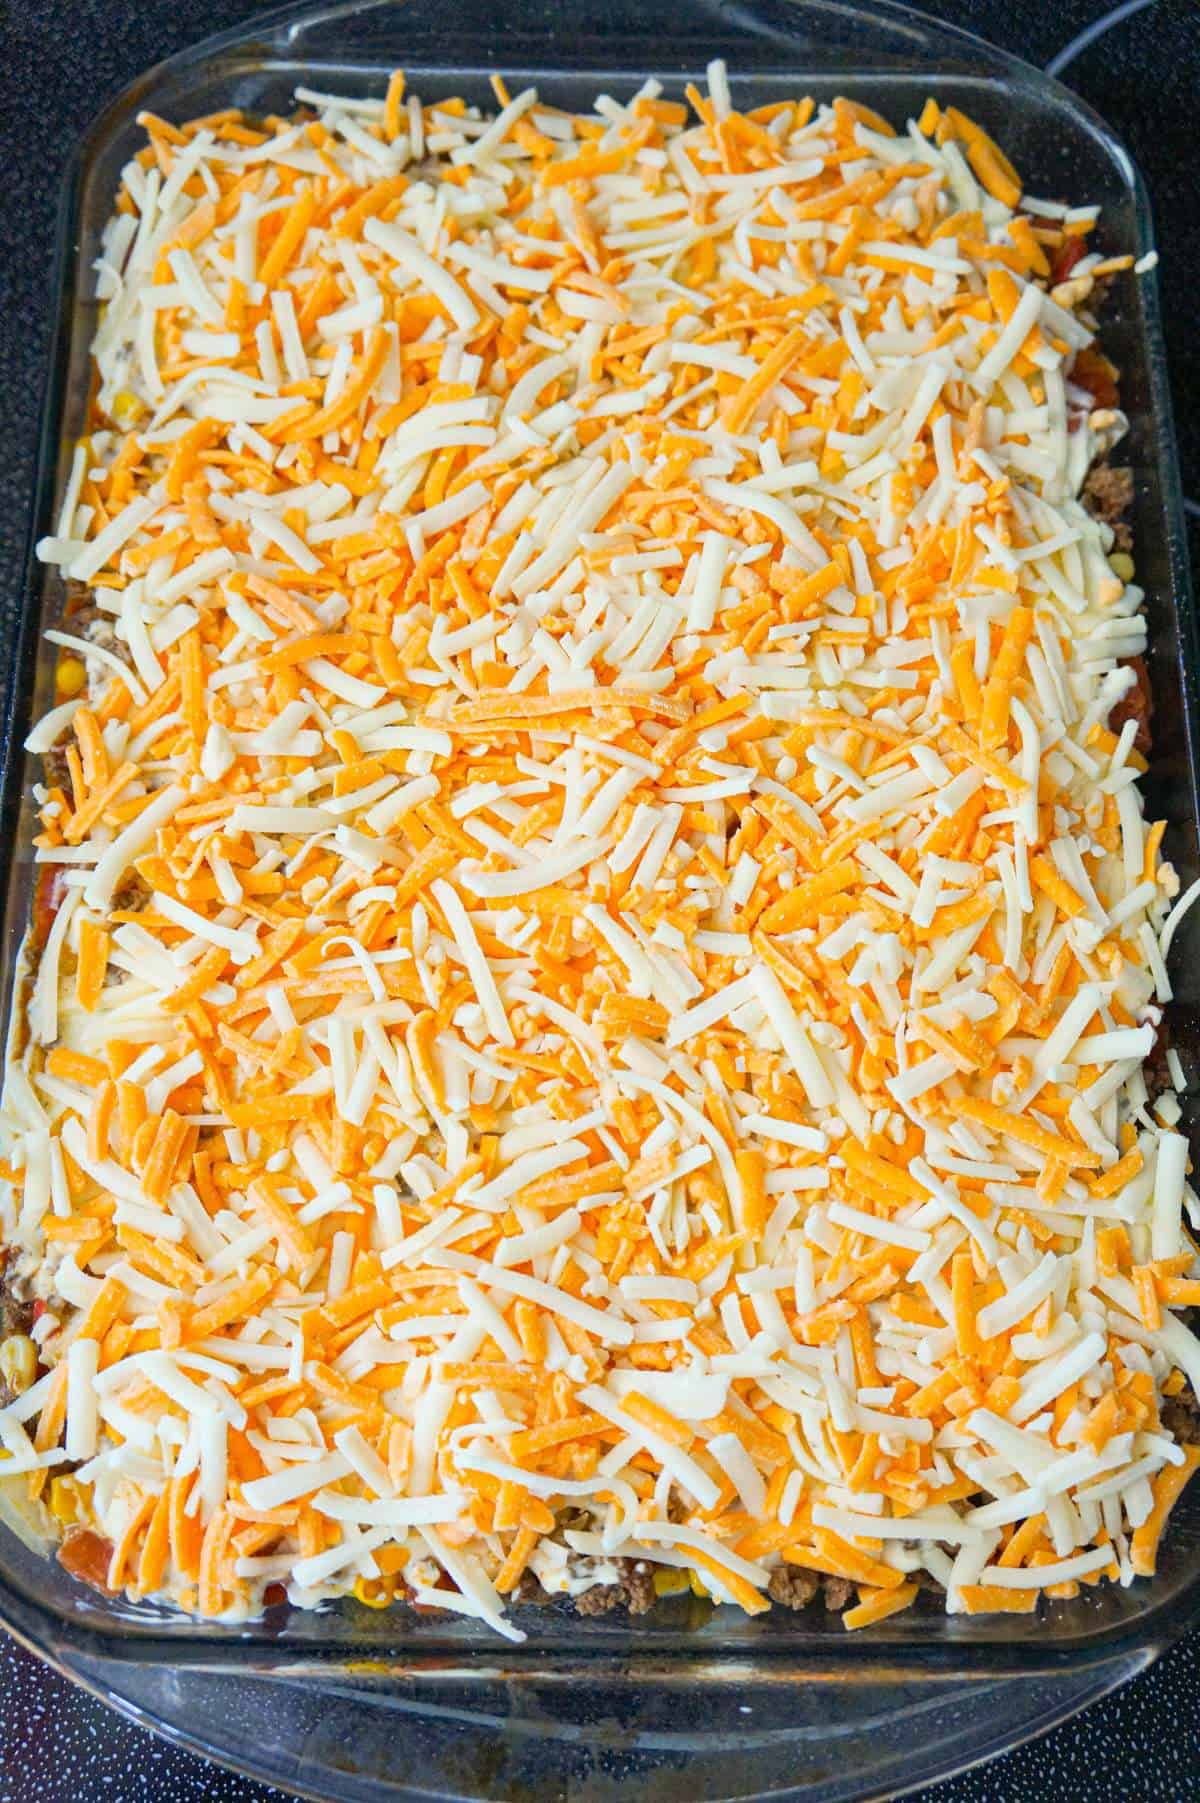 shredded cheddar and mozzarella cheese on top of beef and and biscuit casserole before baking